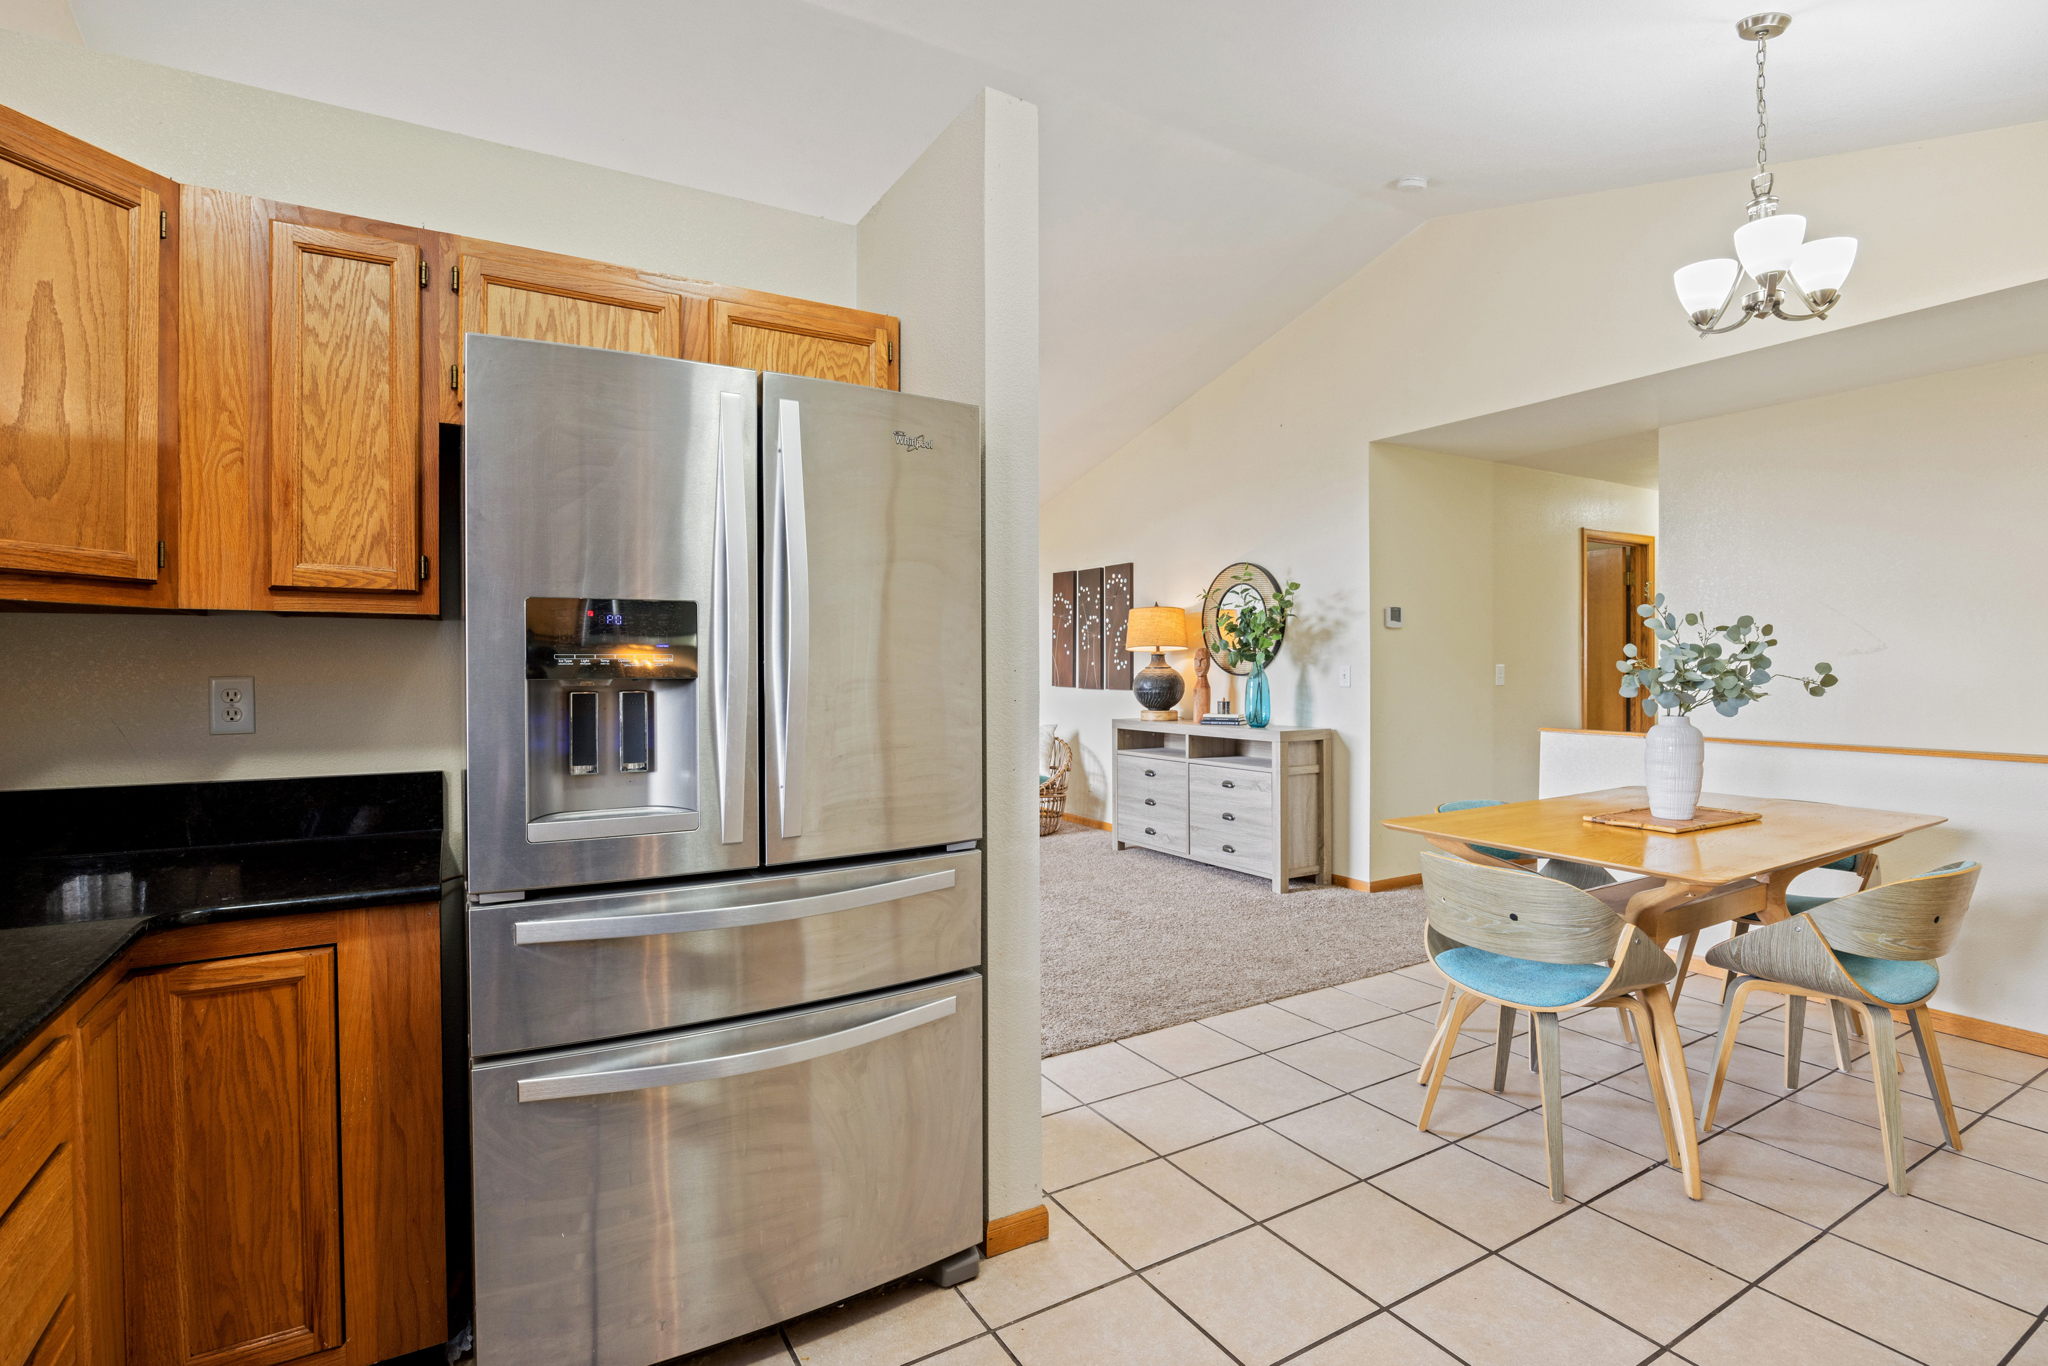 6104 Constellation Dr, Fort Collins, CO 80525, USA Photo 9